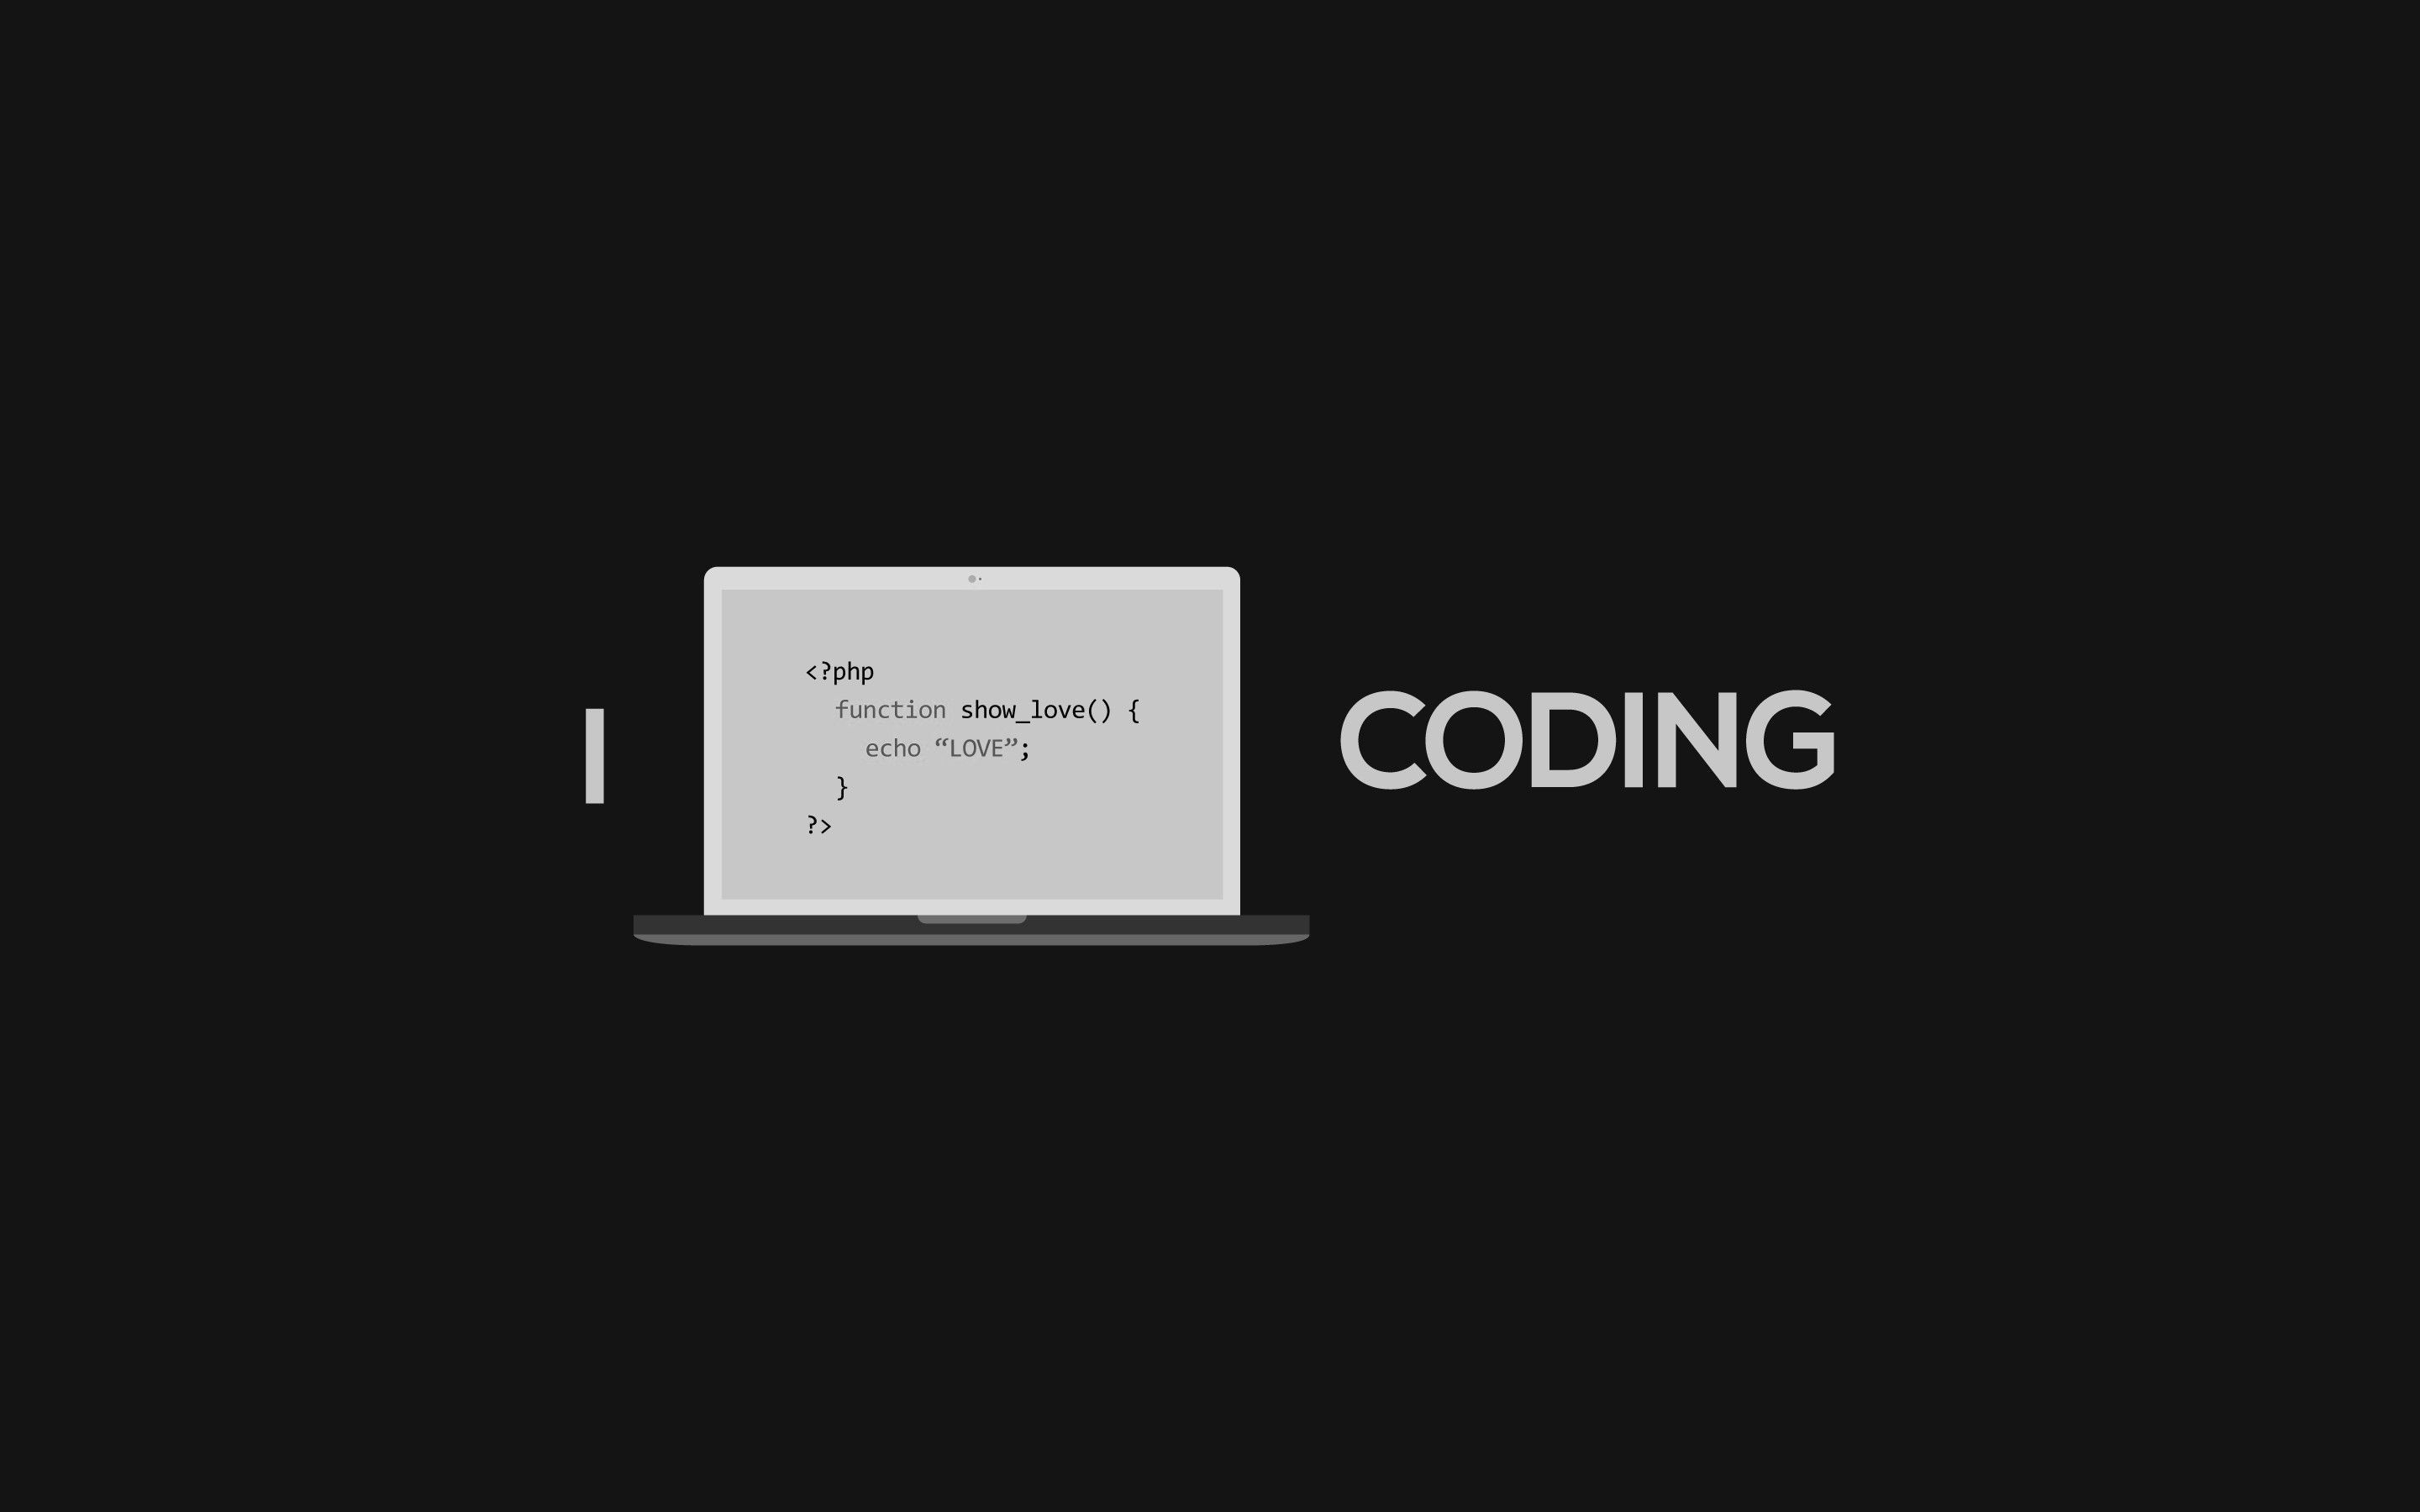 Made a minimalistic wallpaper for Developers / Programmers [1920x1080] :  wallpaper